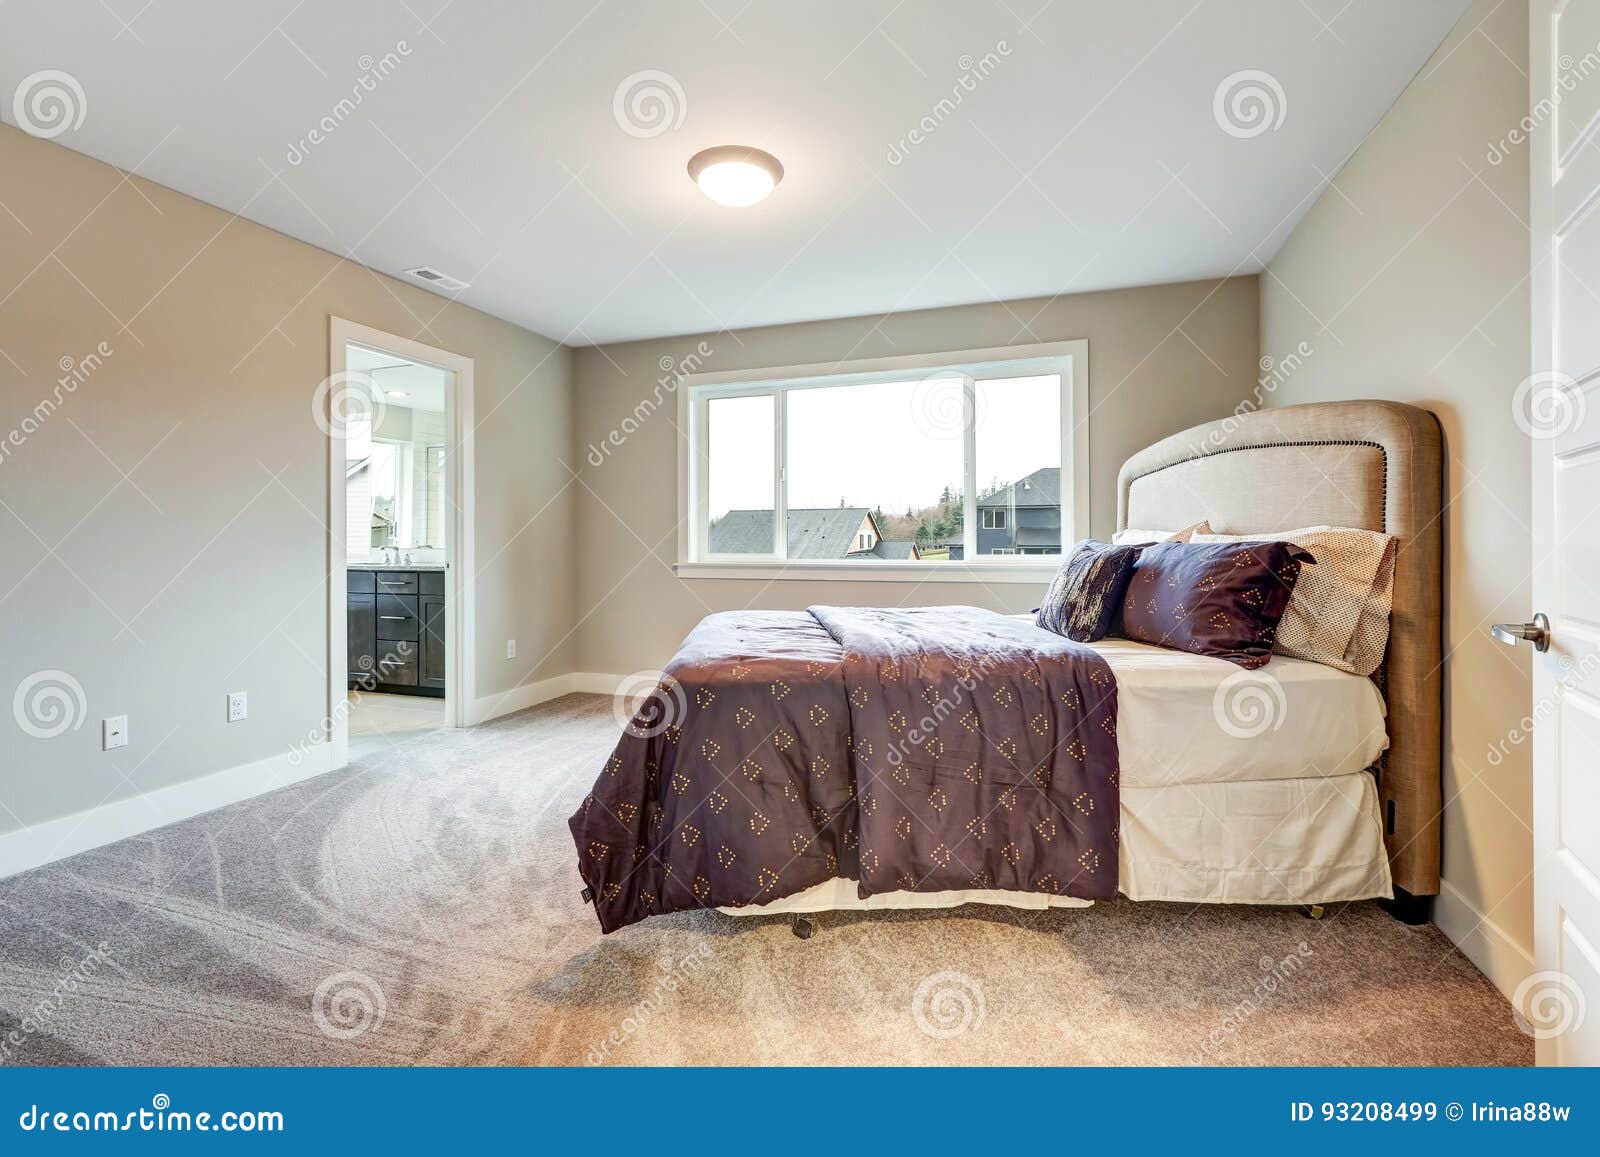 Beige Master Bedroom With King Size Bed Stock Image Image